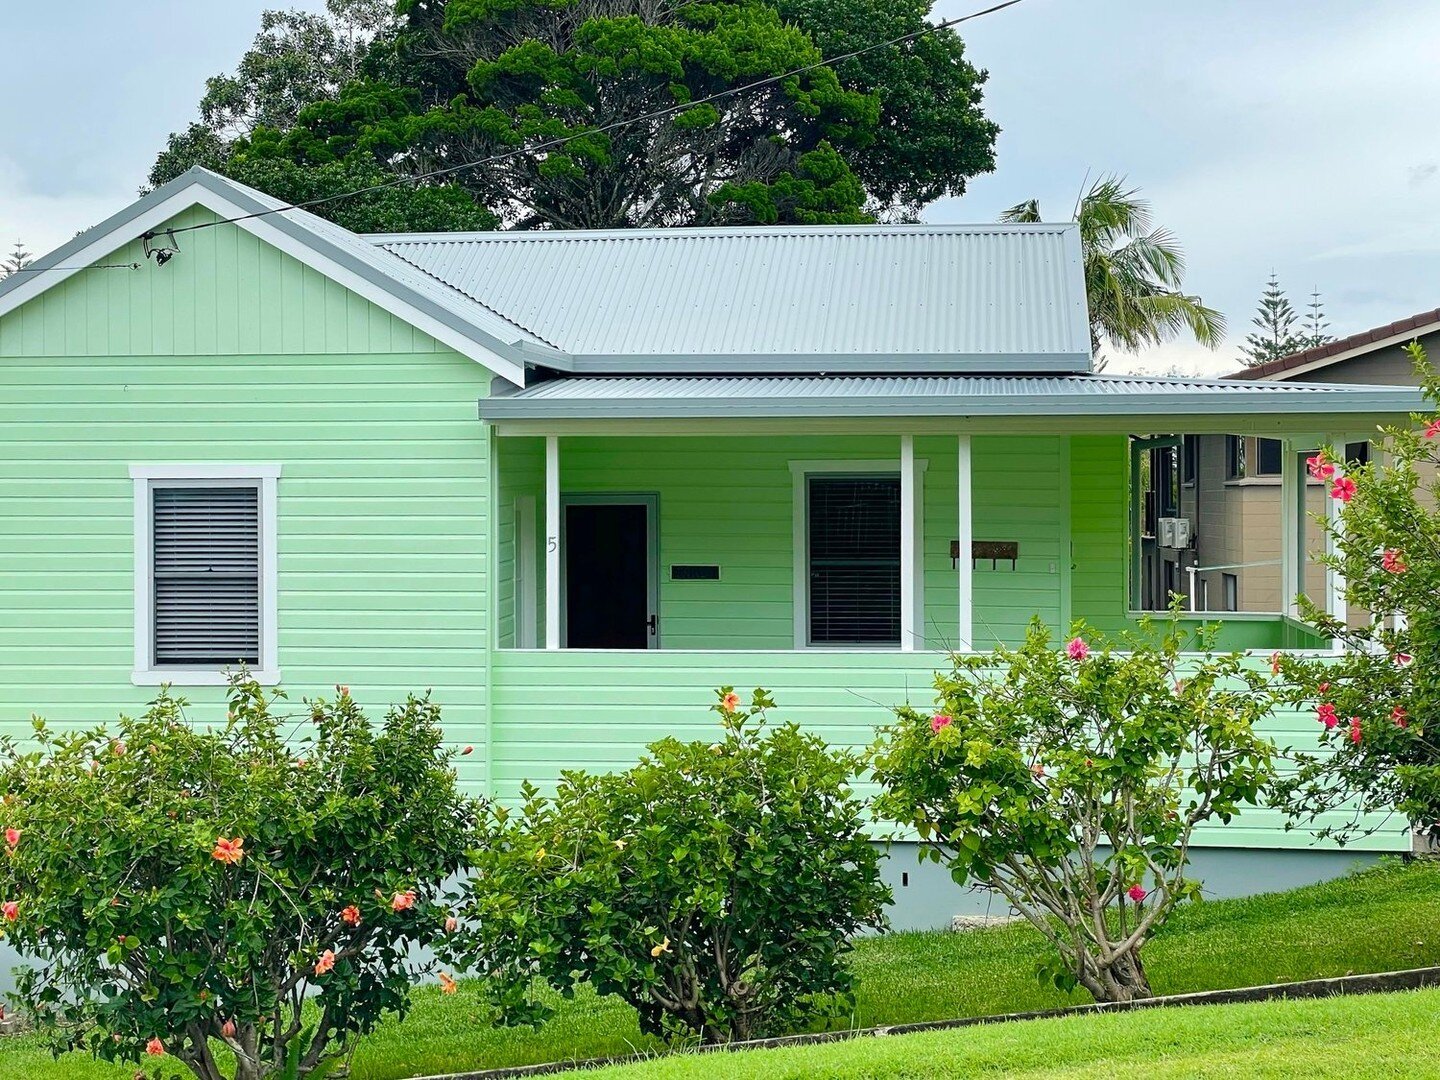 Zig zig through the streets of Yamba and you&rsquo;ll see an array of Federation-style weatherboard beach shacks and fibro cottages, many painted in vibrant colours yet maintaining their original style and charm. While some have been upgraded for acc